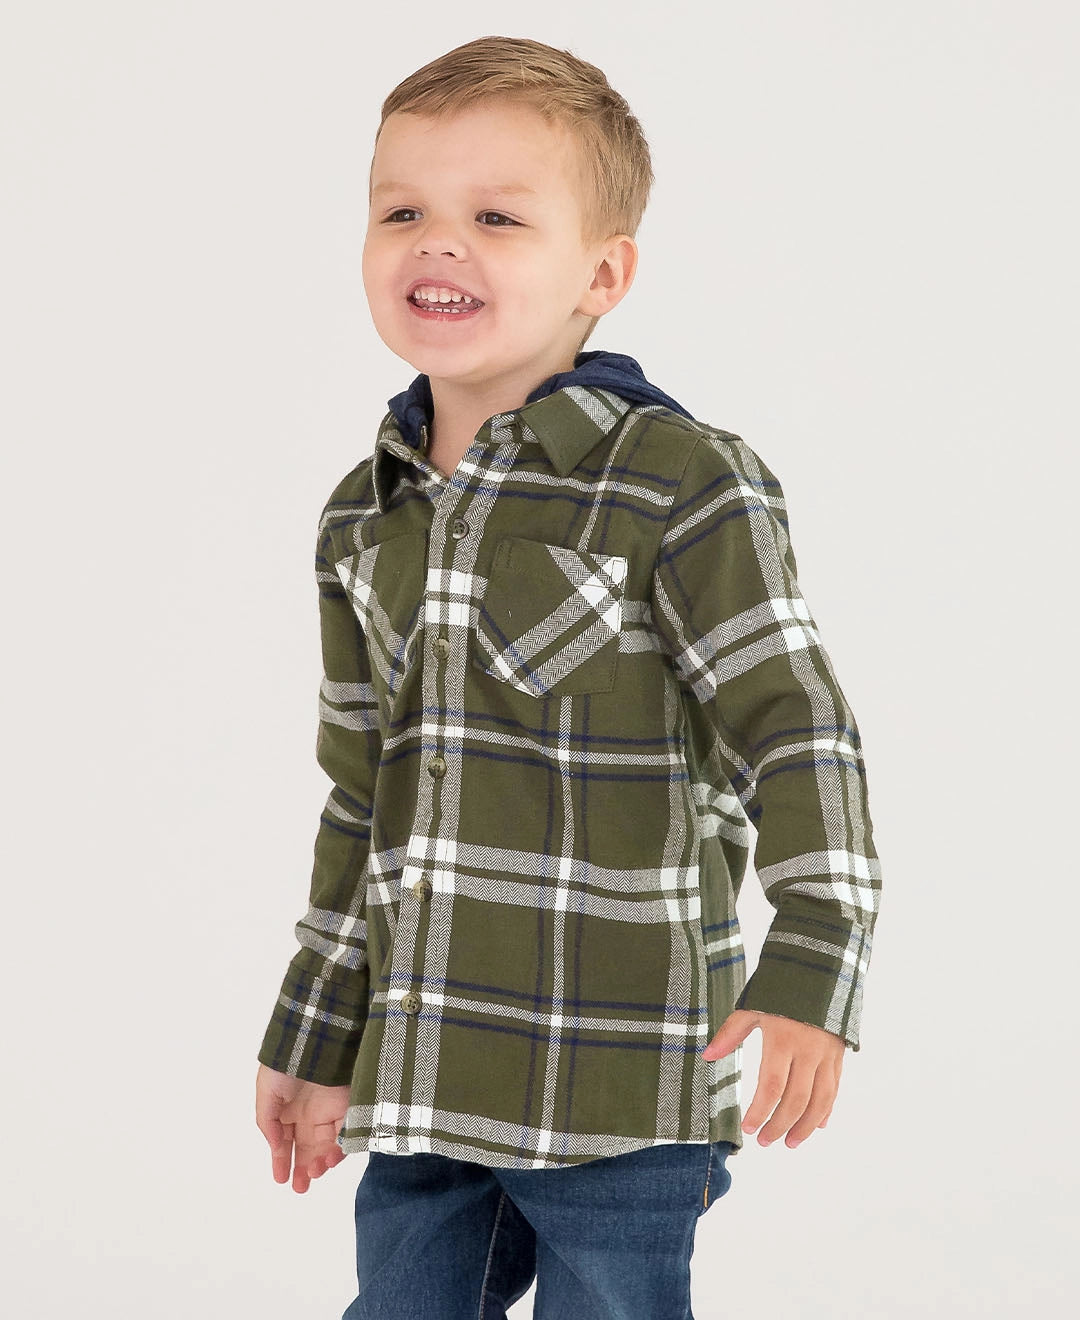 Ruffle Butts Oliver Plaid Button Down Shirt